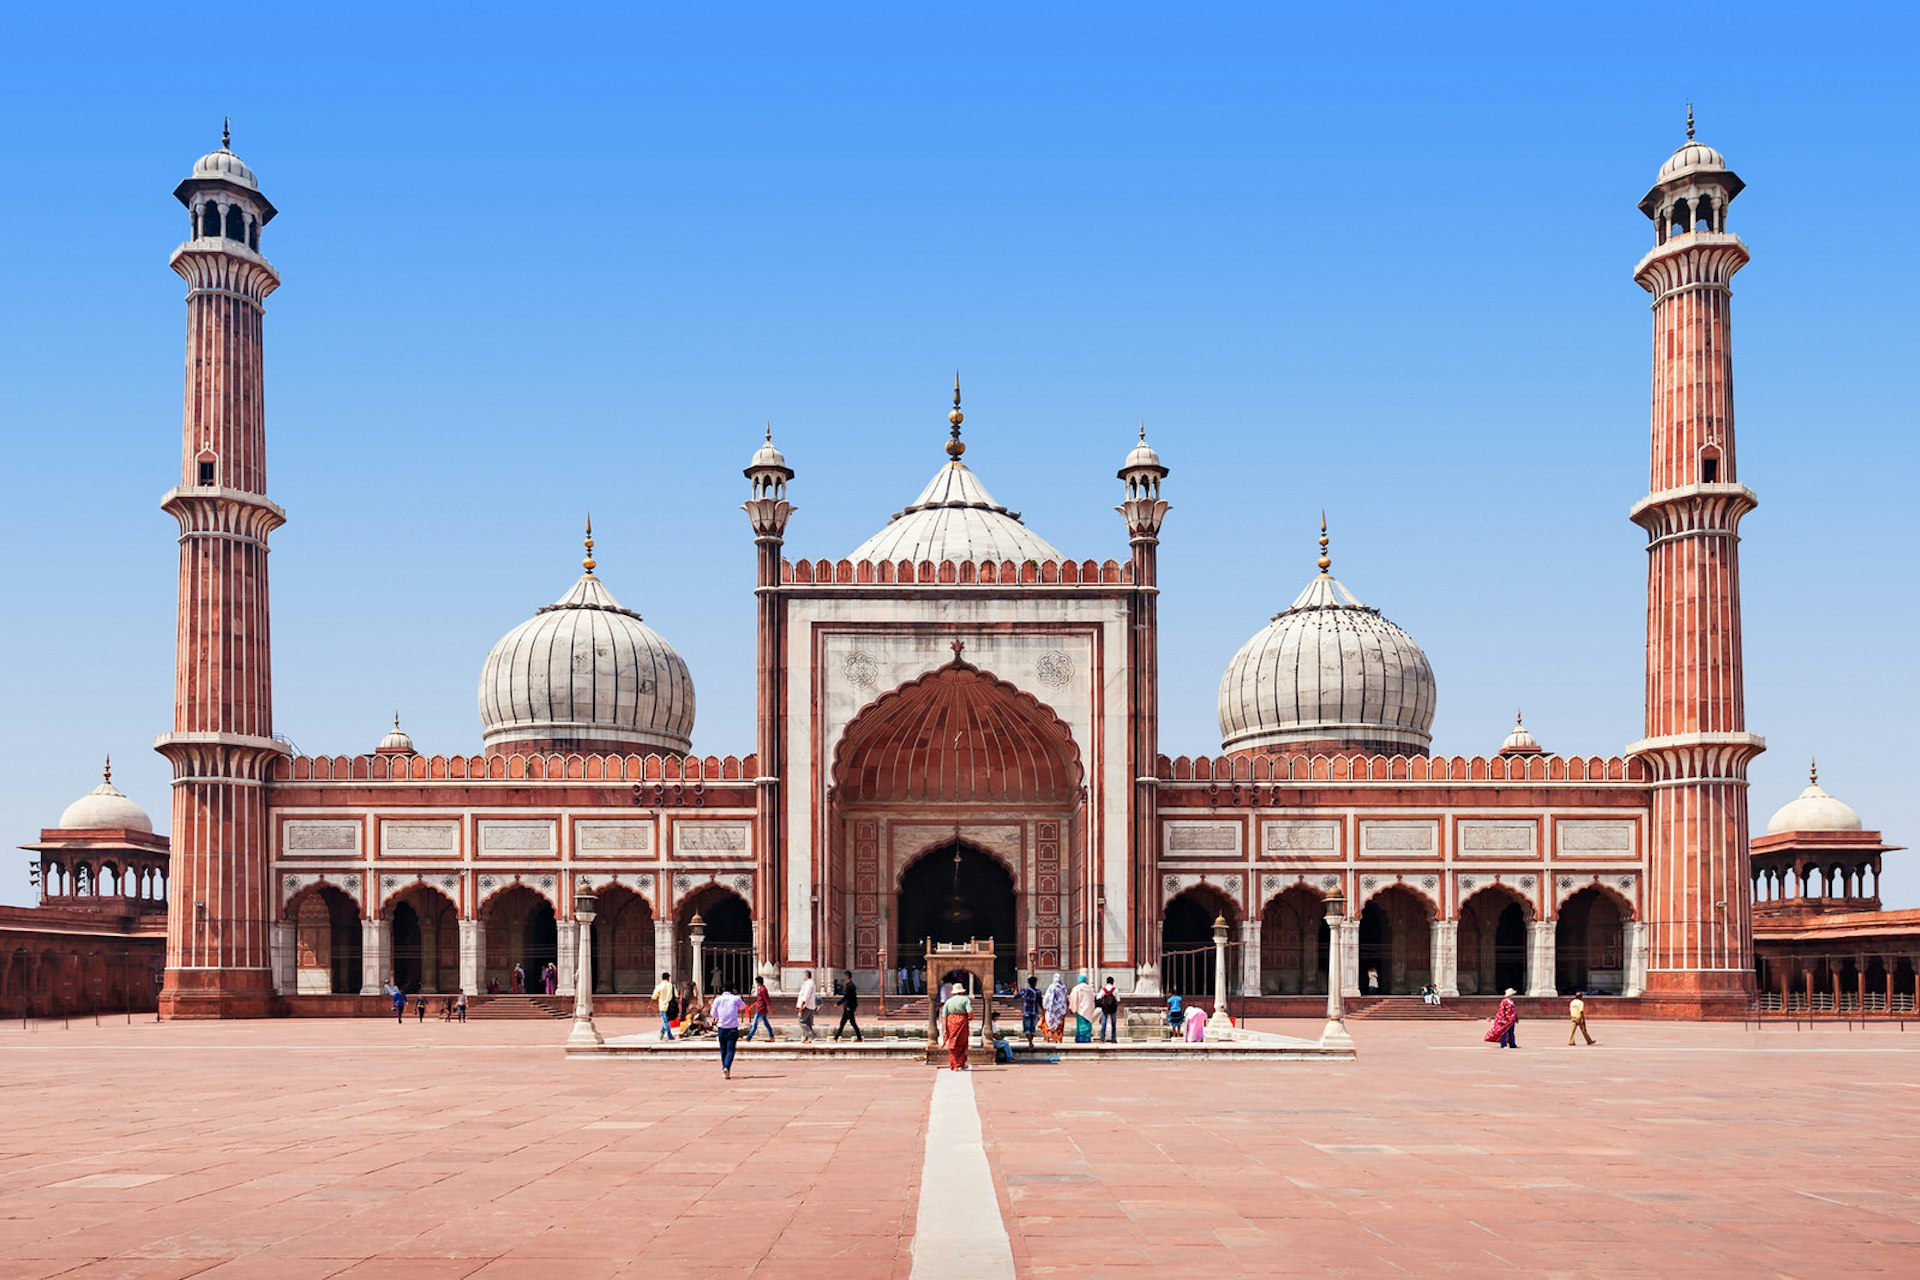 A large mosque in an open red-brick square. It has two tall minarets on either side and three domes